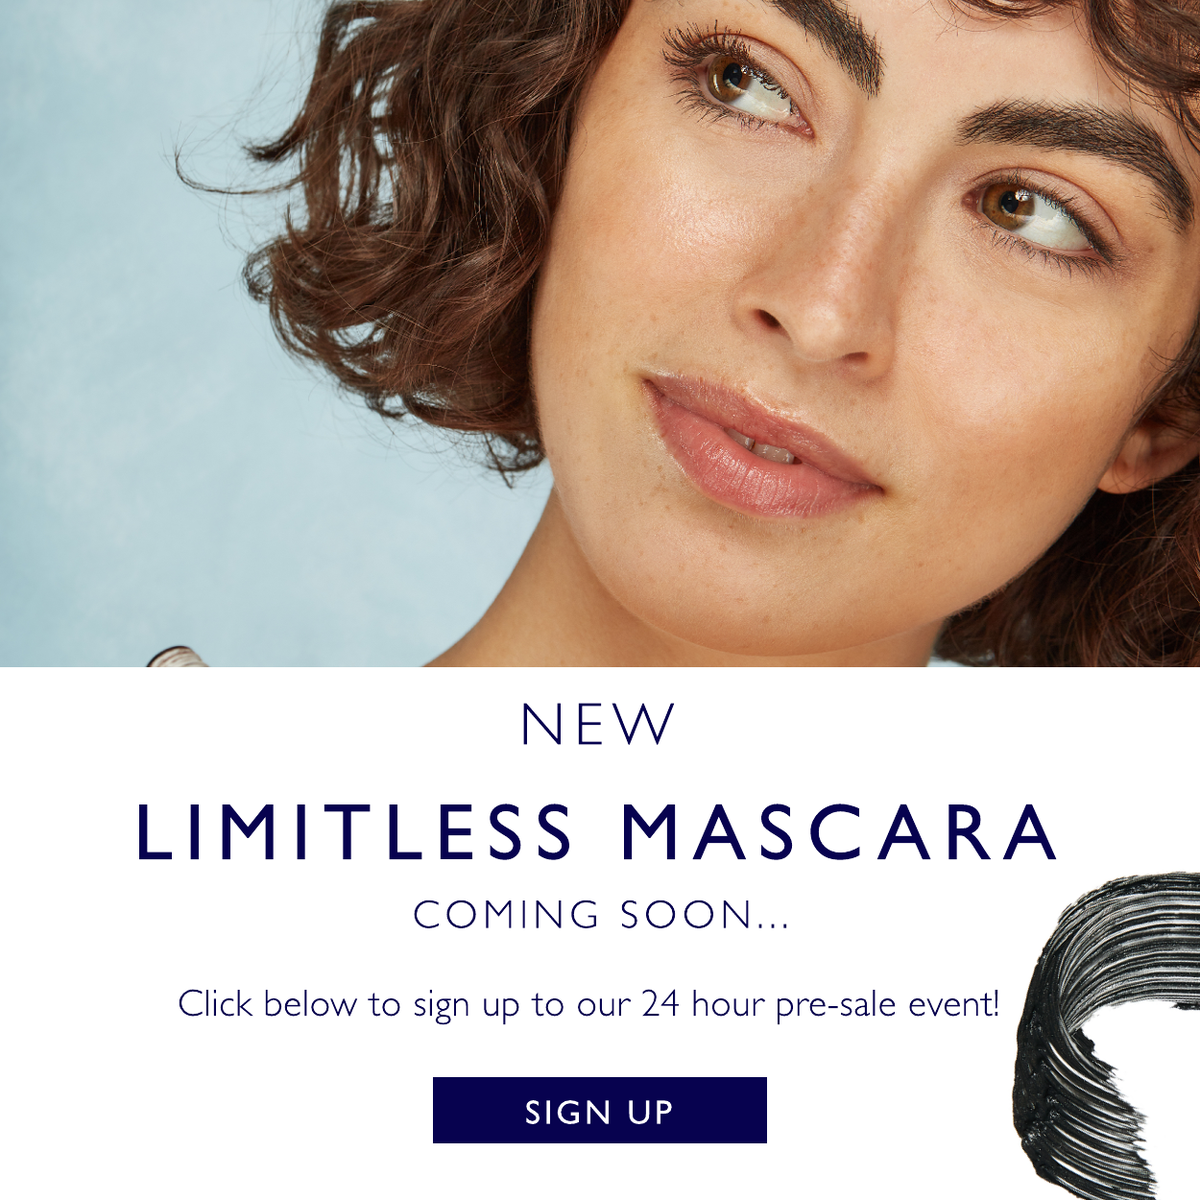 Limiltess Mascara coming soon. Sign up now